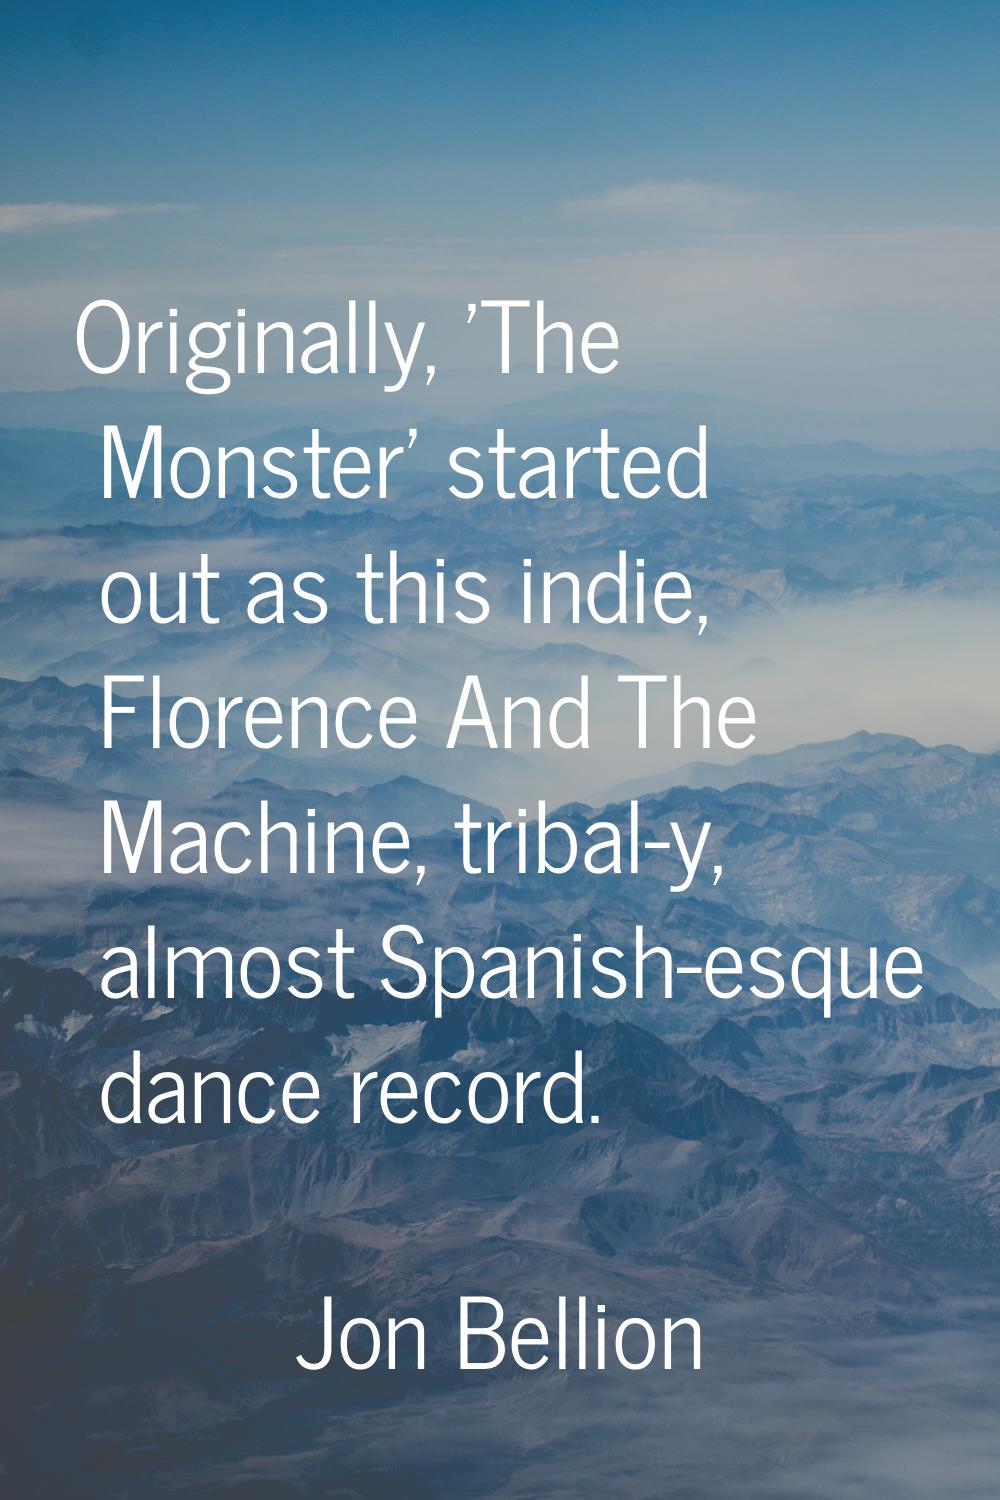 Originally, 'The Monster' started out as this indie, Florence And The Machine, tribal-y, almost Spa